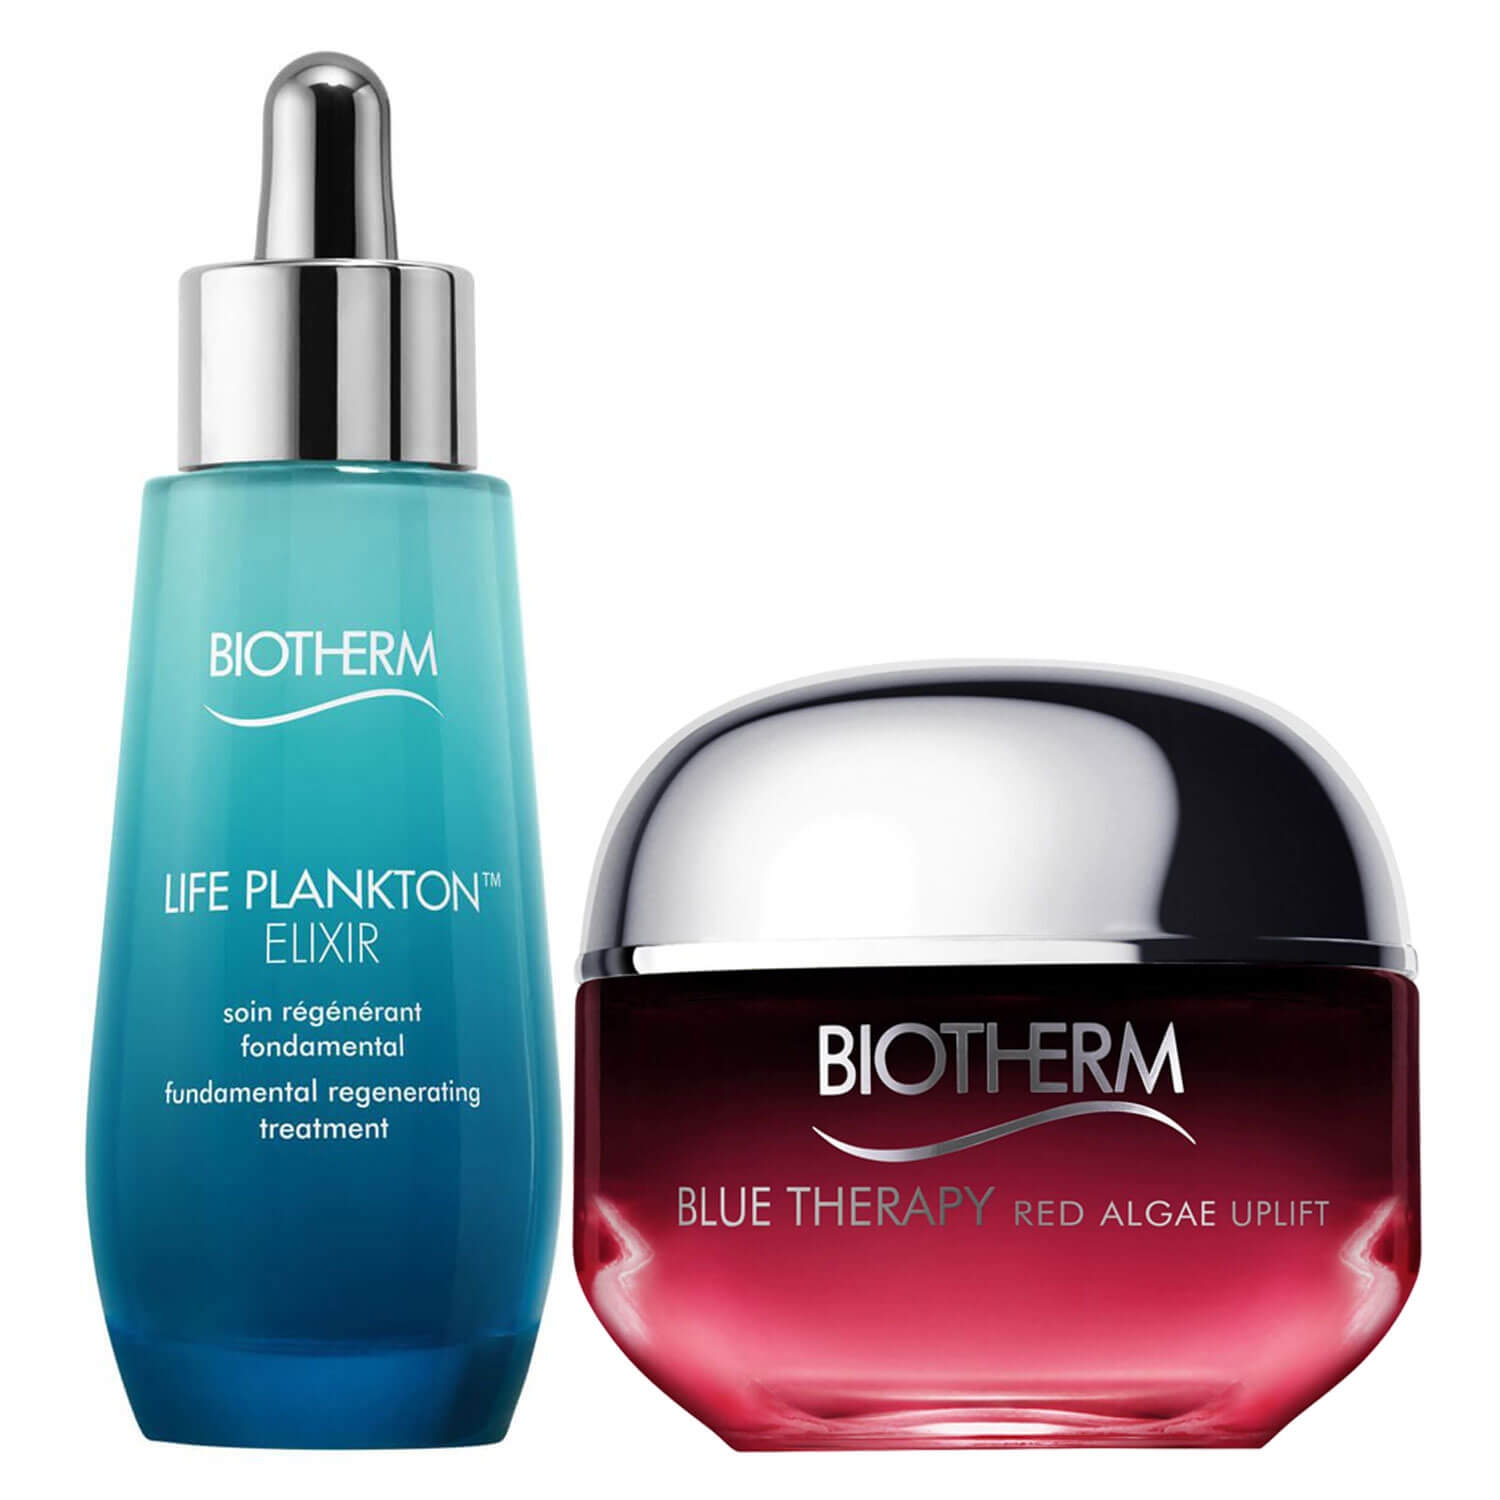 Product image from Biotherm Specials - Life Plankton Elixir & Blue Therapy Red Algae Uplift